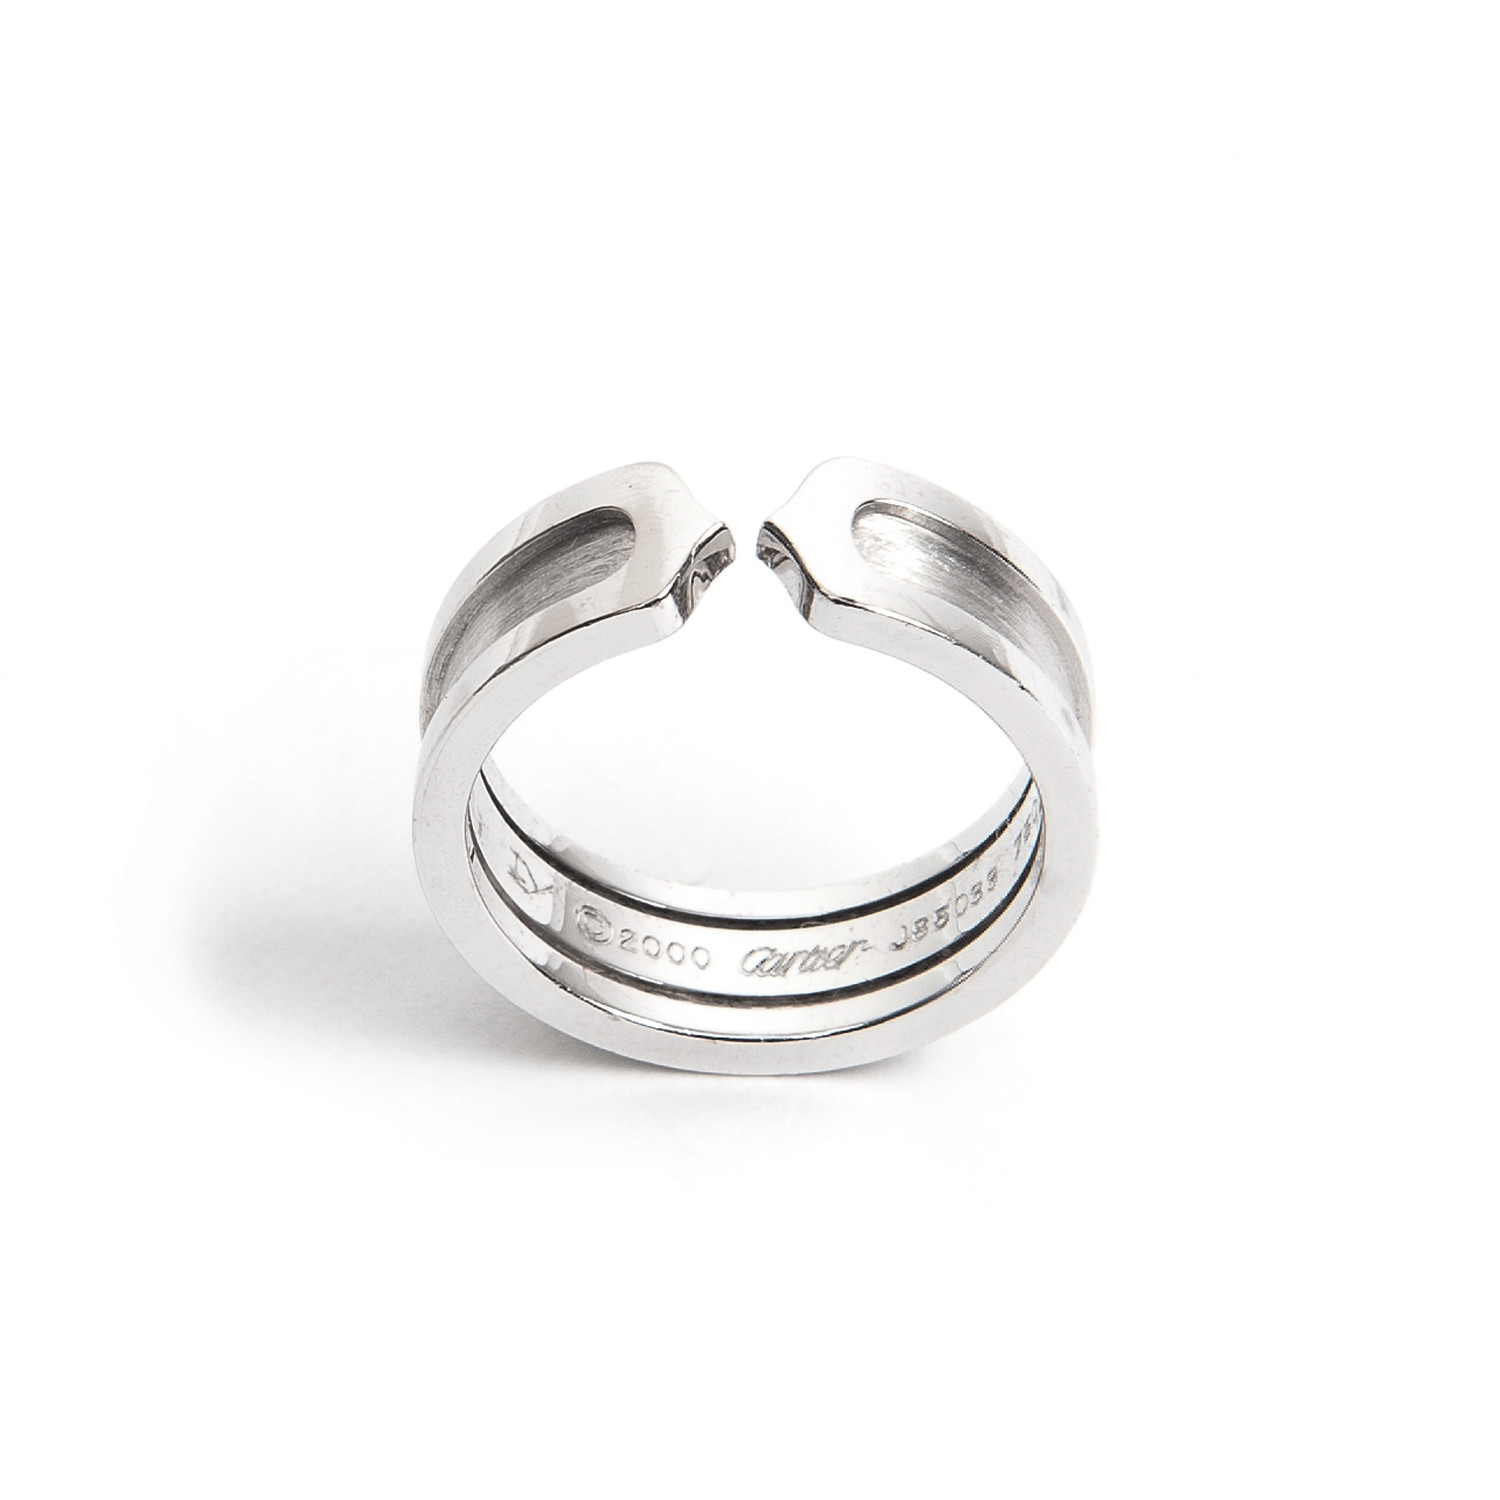 Cartier 18k White Gold Double Ring // Size 7 - Cartier Vintage Jewelry ...